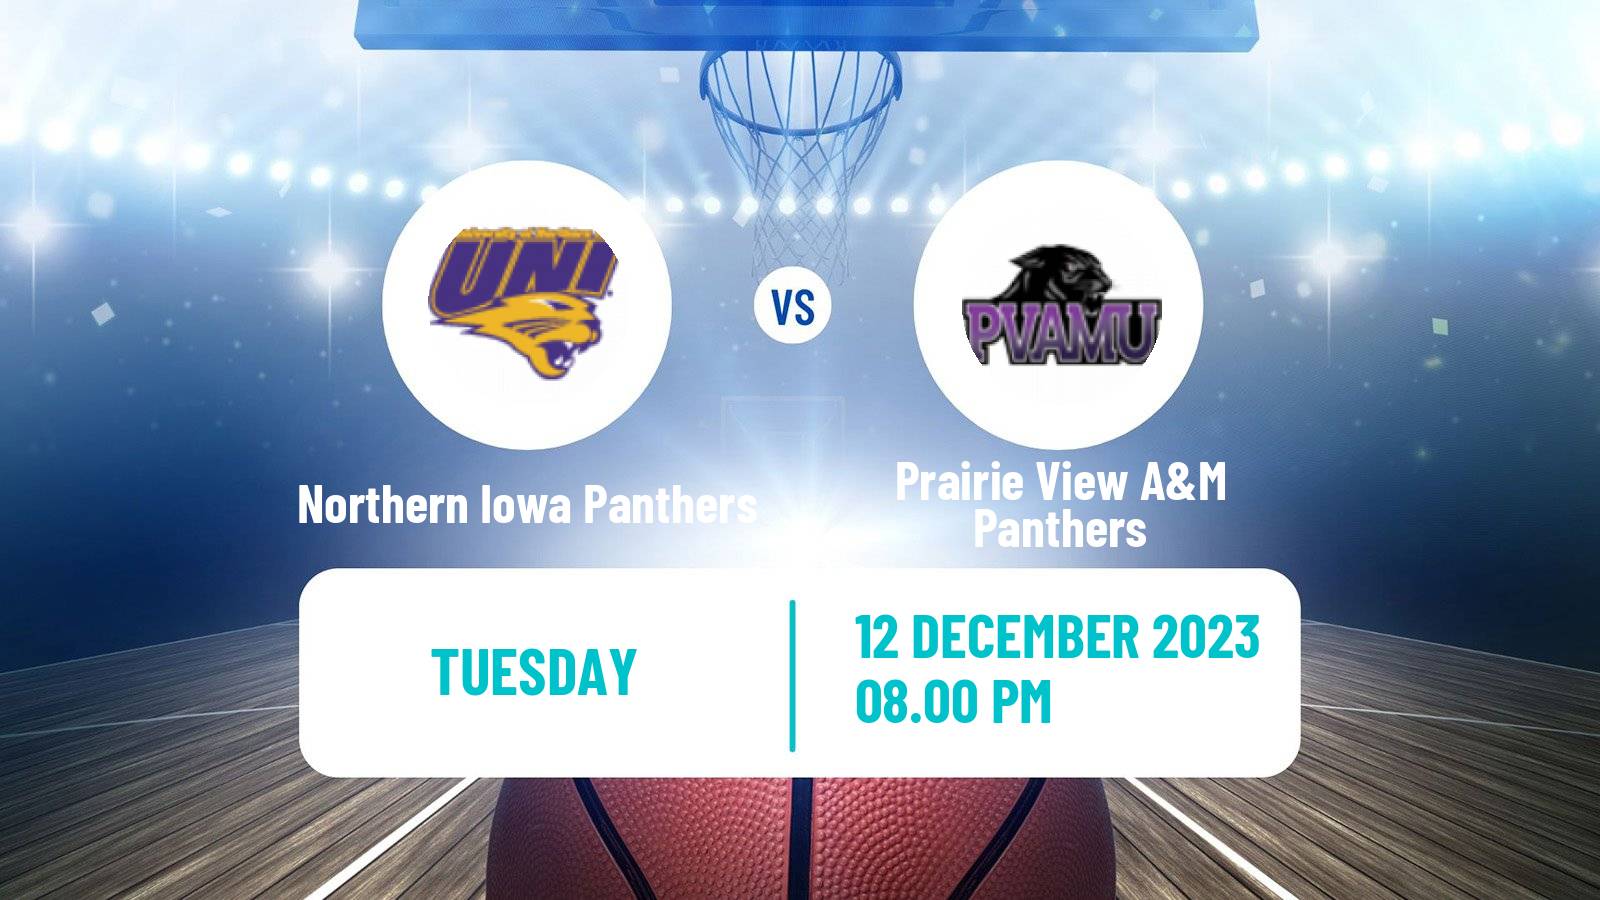 Basketball NCAA College Basketball Northern Iowa Panthers - Prairie View A&M Panthers